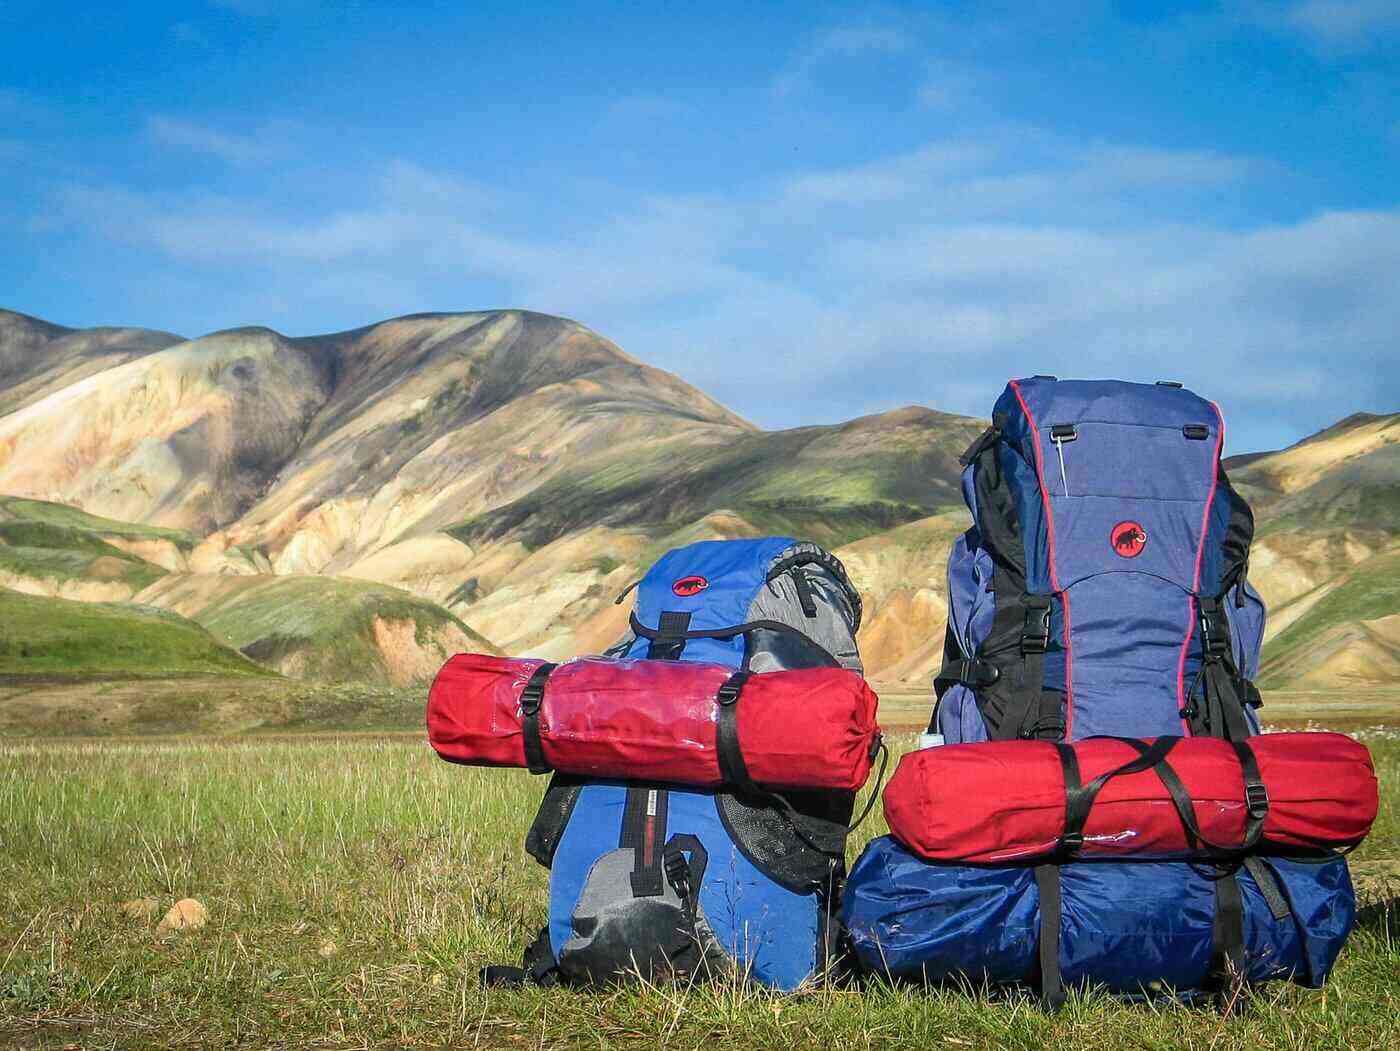 backpacks on ground in front of hills - ziplock bag on car mirror and 3 other viral travel hacks that work